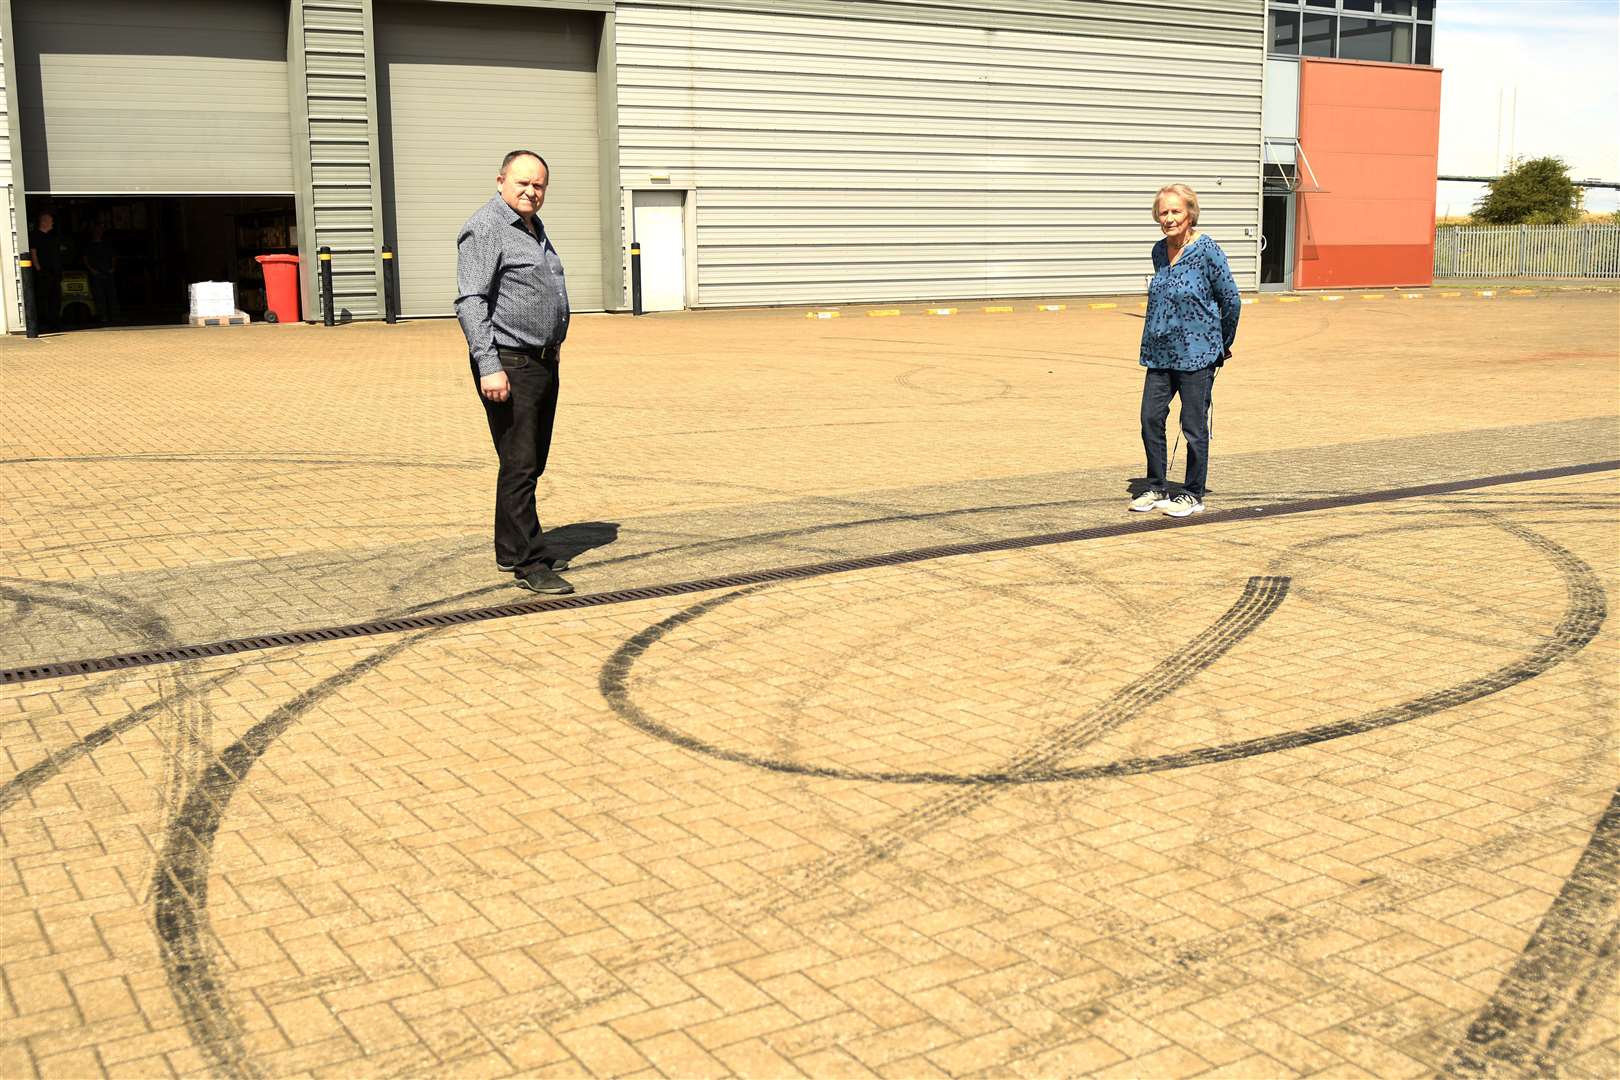 The "boy racers" at the Screwfix site in Quadrant Court, Crossways Boulevard prompted councillors Peter Harman and Lesley Hawes to lead a campaign to put a dispersal order into place..Picture: Barry Goodwin.